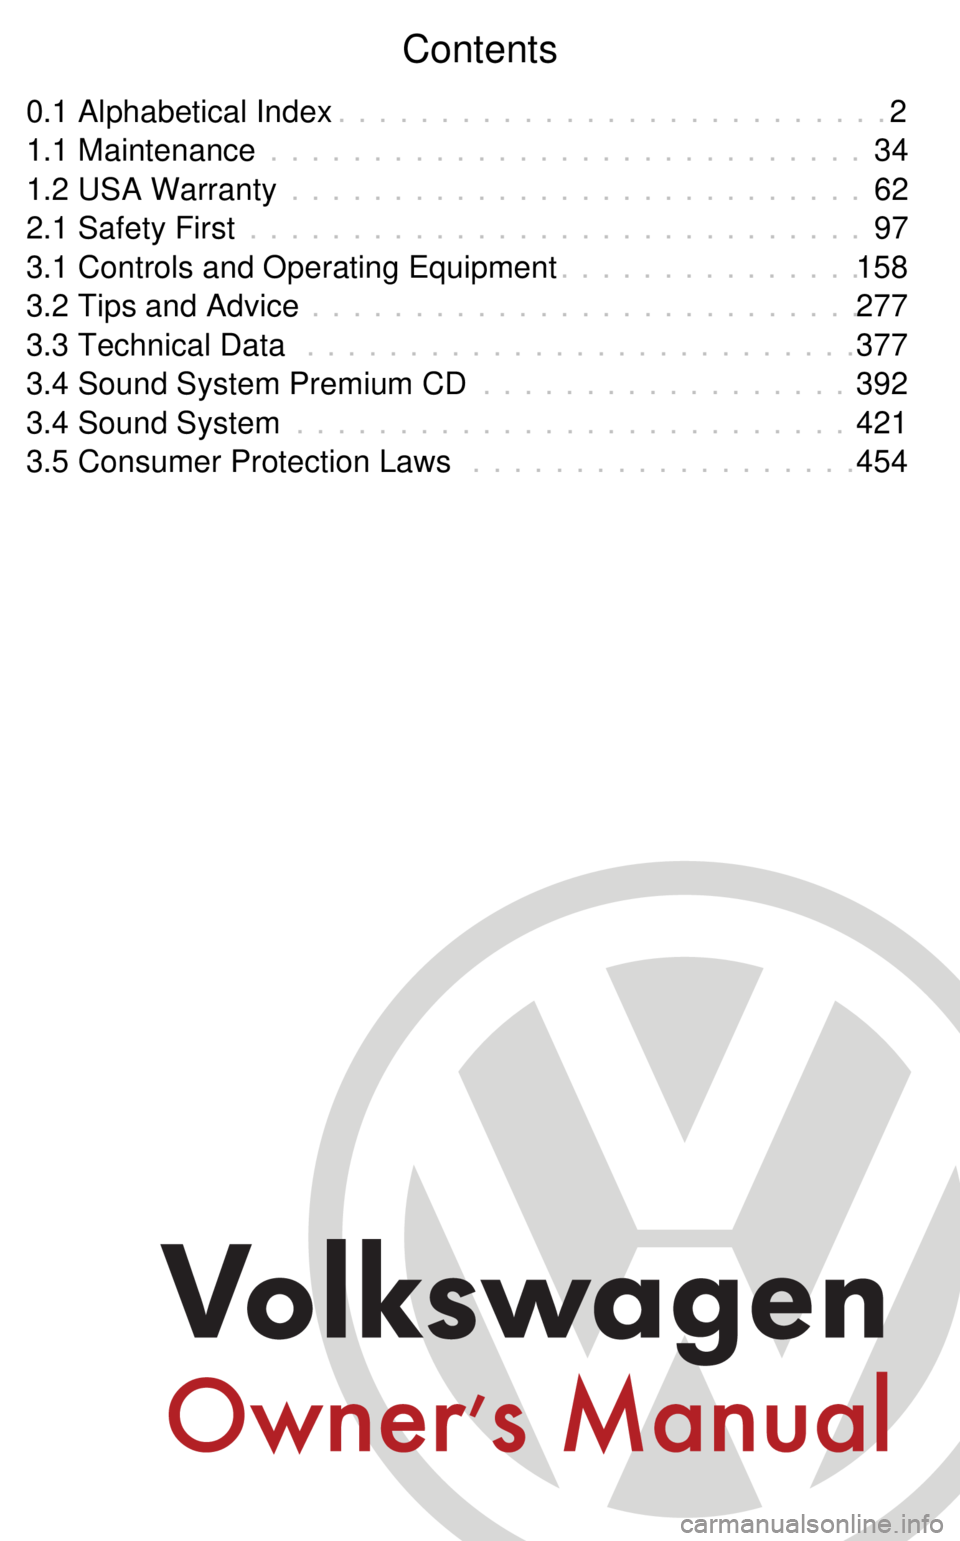 VOLKSWAGEN GOLF 1998  Owners Manual Contents
0.1 Alphabetical Index 2
. . . . . . . . . . . . . . . . . . . . . . . . . . .
1.1 Maintenance 34
. . . . . . . . . . . . . . . . . . . . . . . . . . . . .
1.2 USA Warranty 62
. . . . . . . .